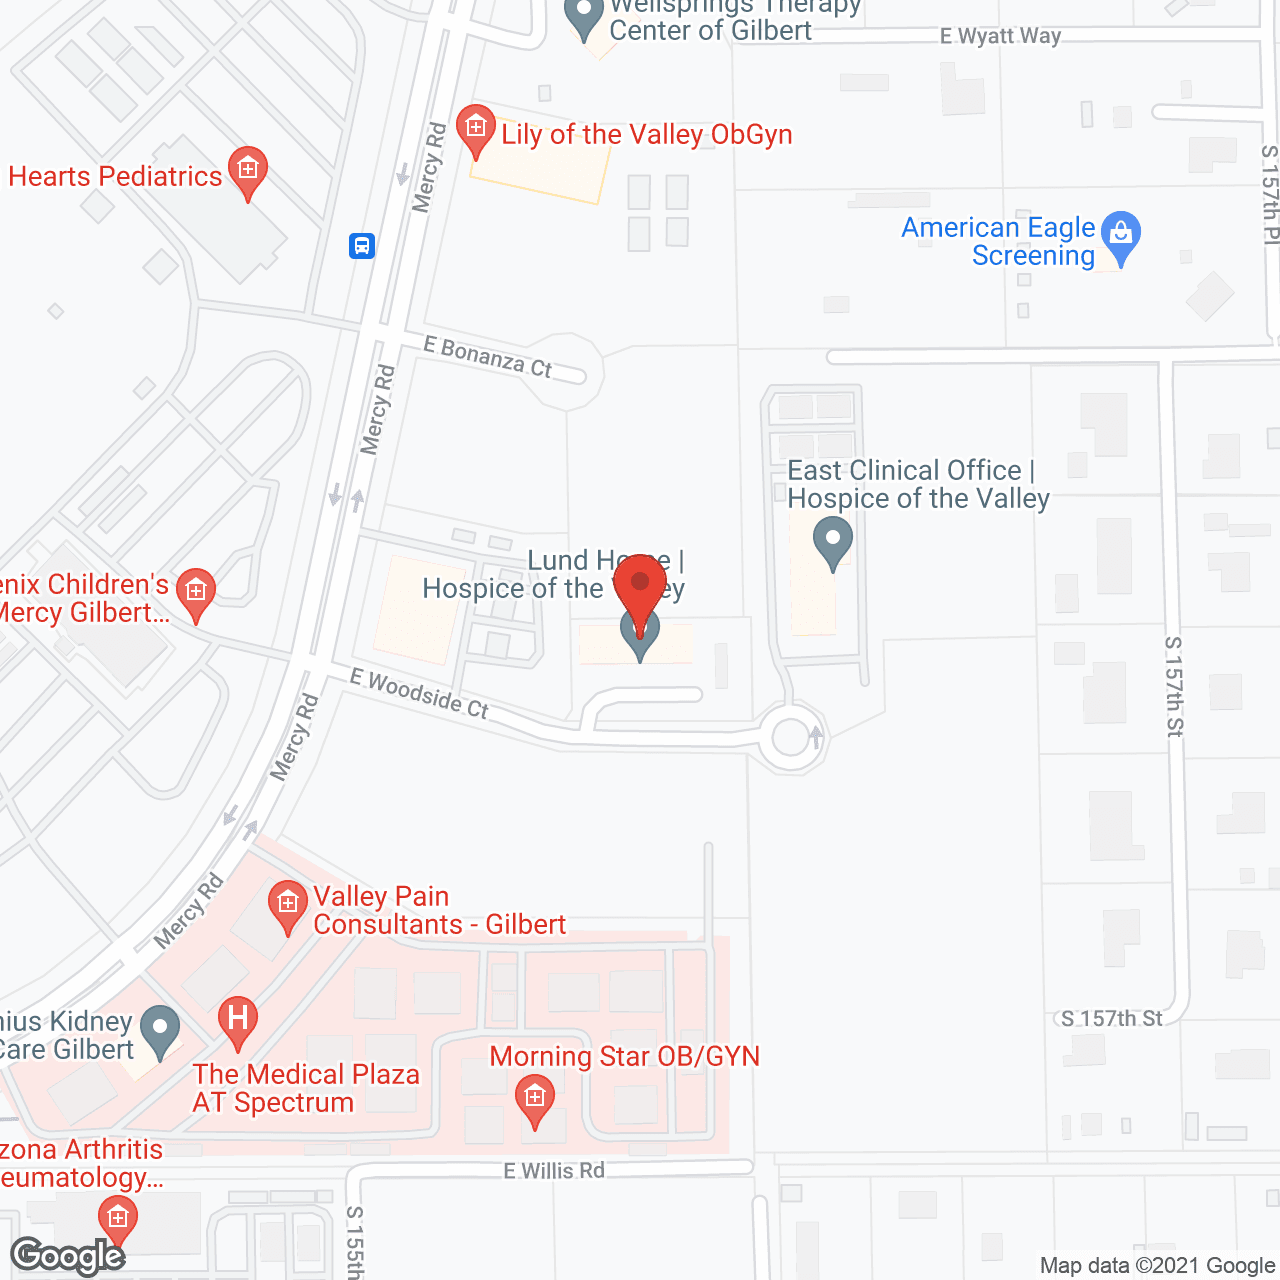 Lund Home Hospice Of The Valley in google map